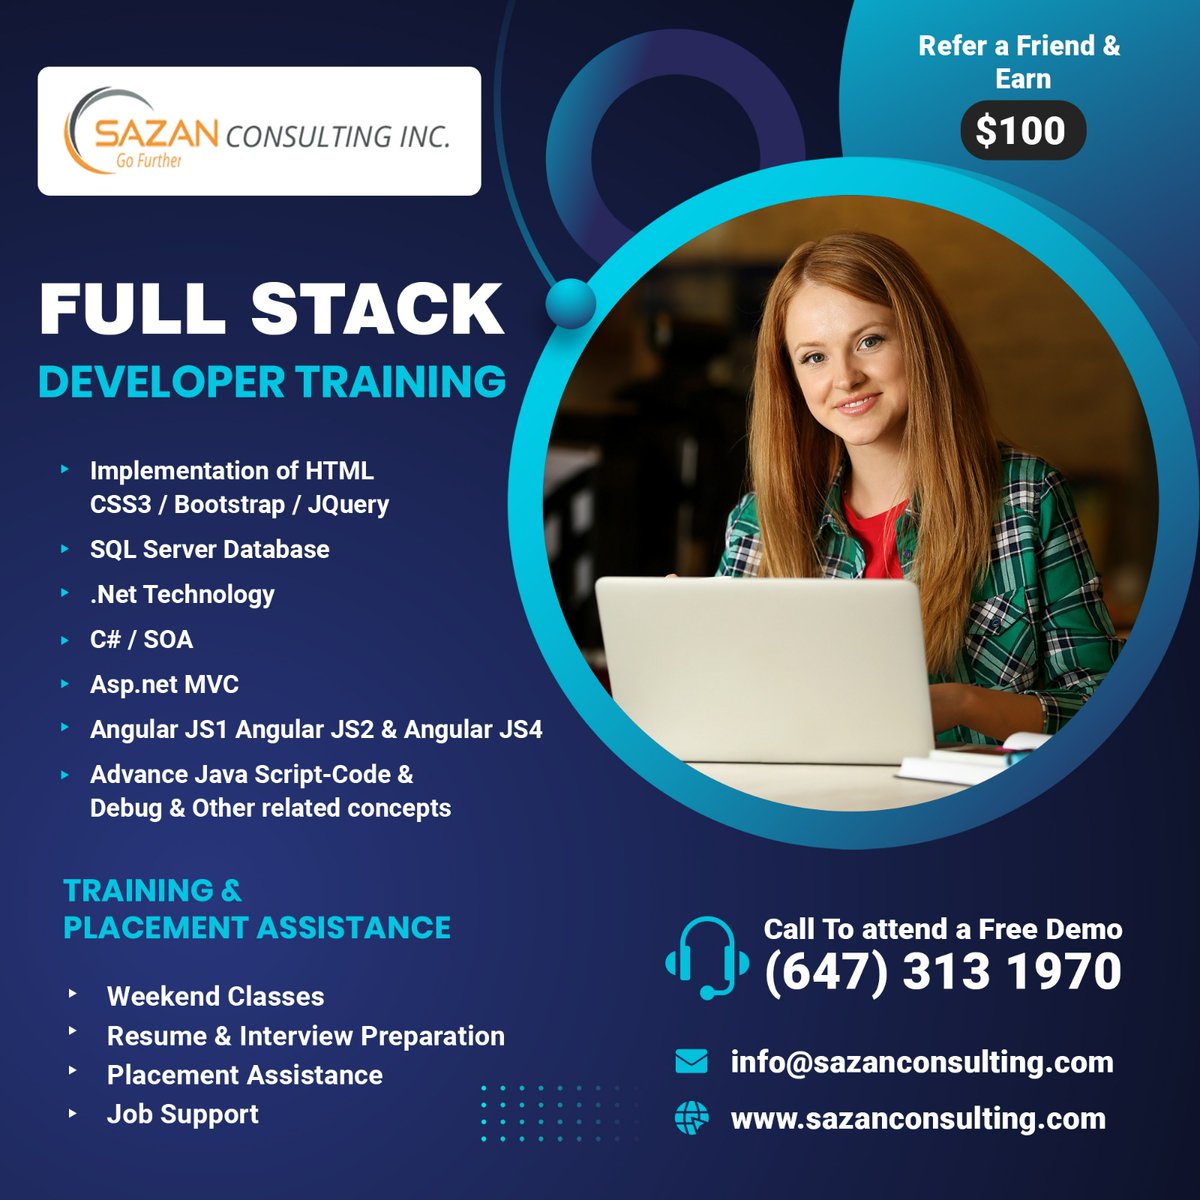 Join our Full Stack training to master both back-end and front-end skills. Led by experts, our online training sessions offer in-depth knowledge. Contact us at 6473131970 or email info@sazanconsulting.com to register. #fullstackdevelopers #jobopenings #hiringnow #jobseekers #GTA